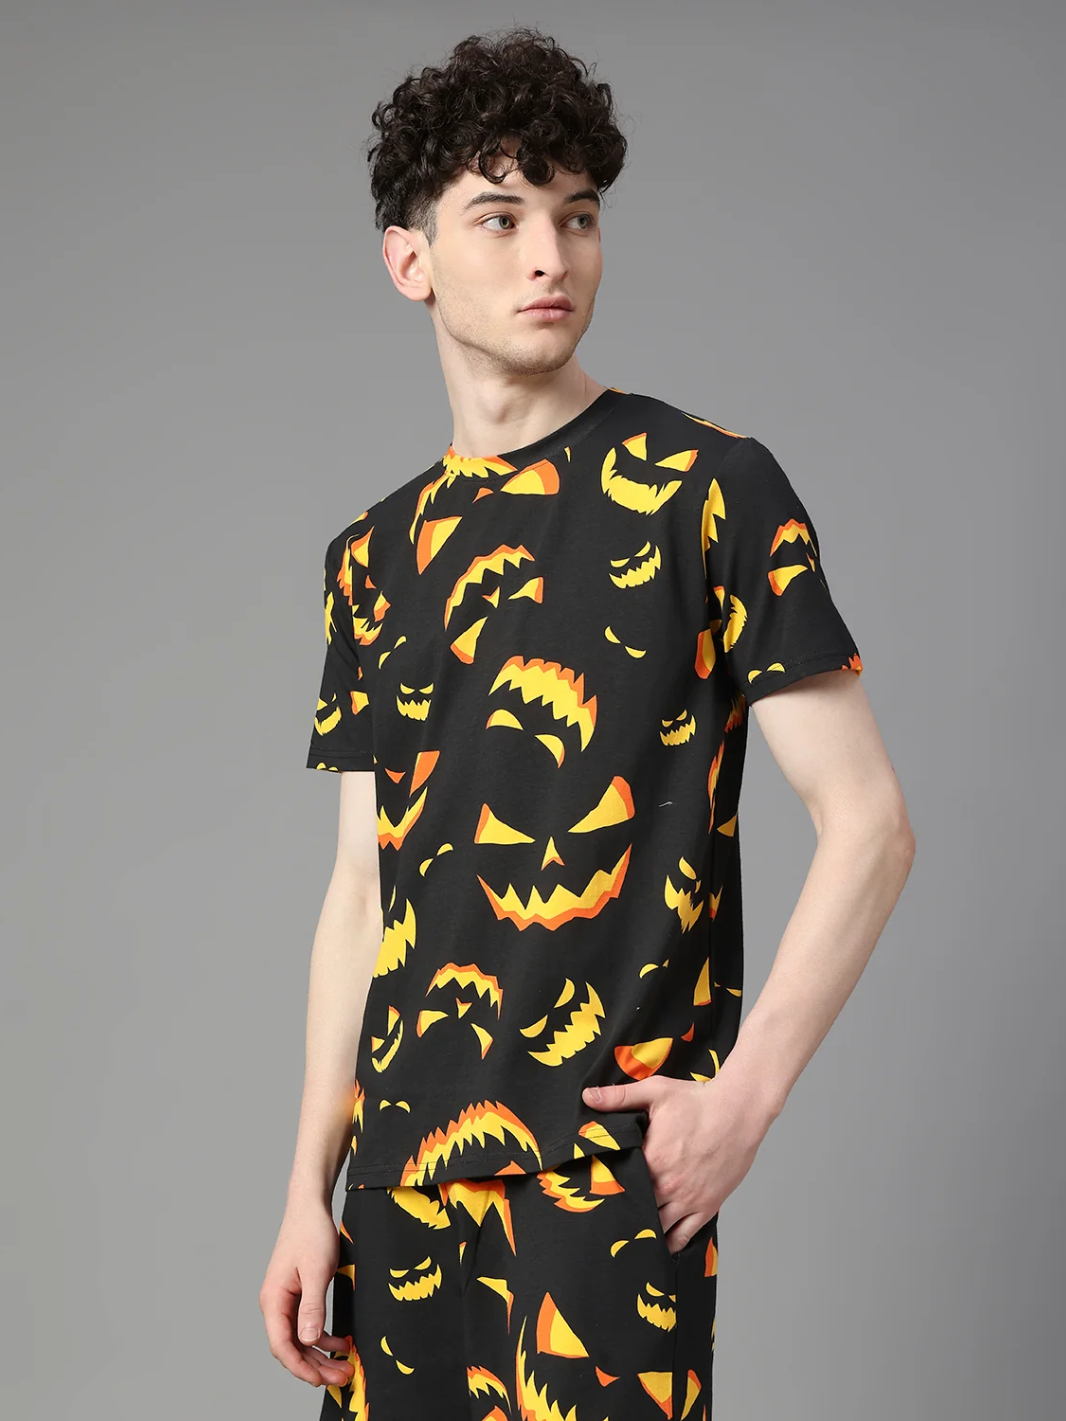 Men's Yellow and Black Graphic Printed Co-ords